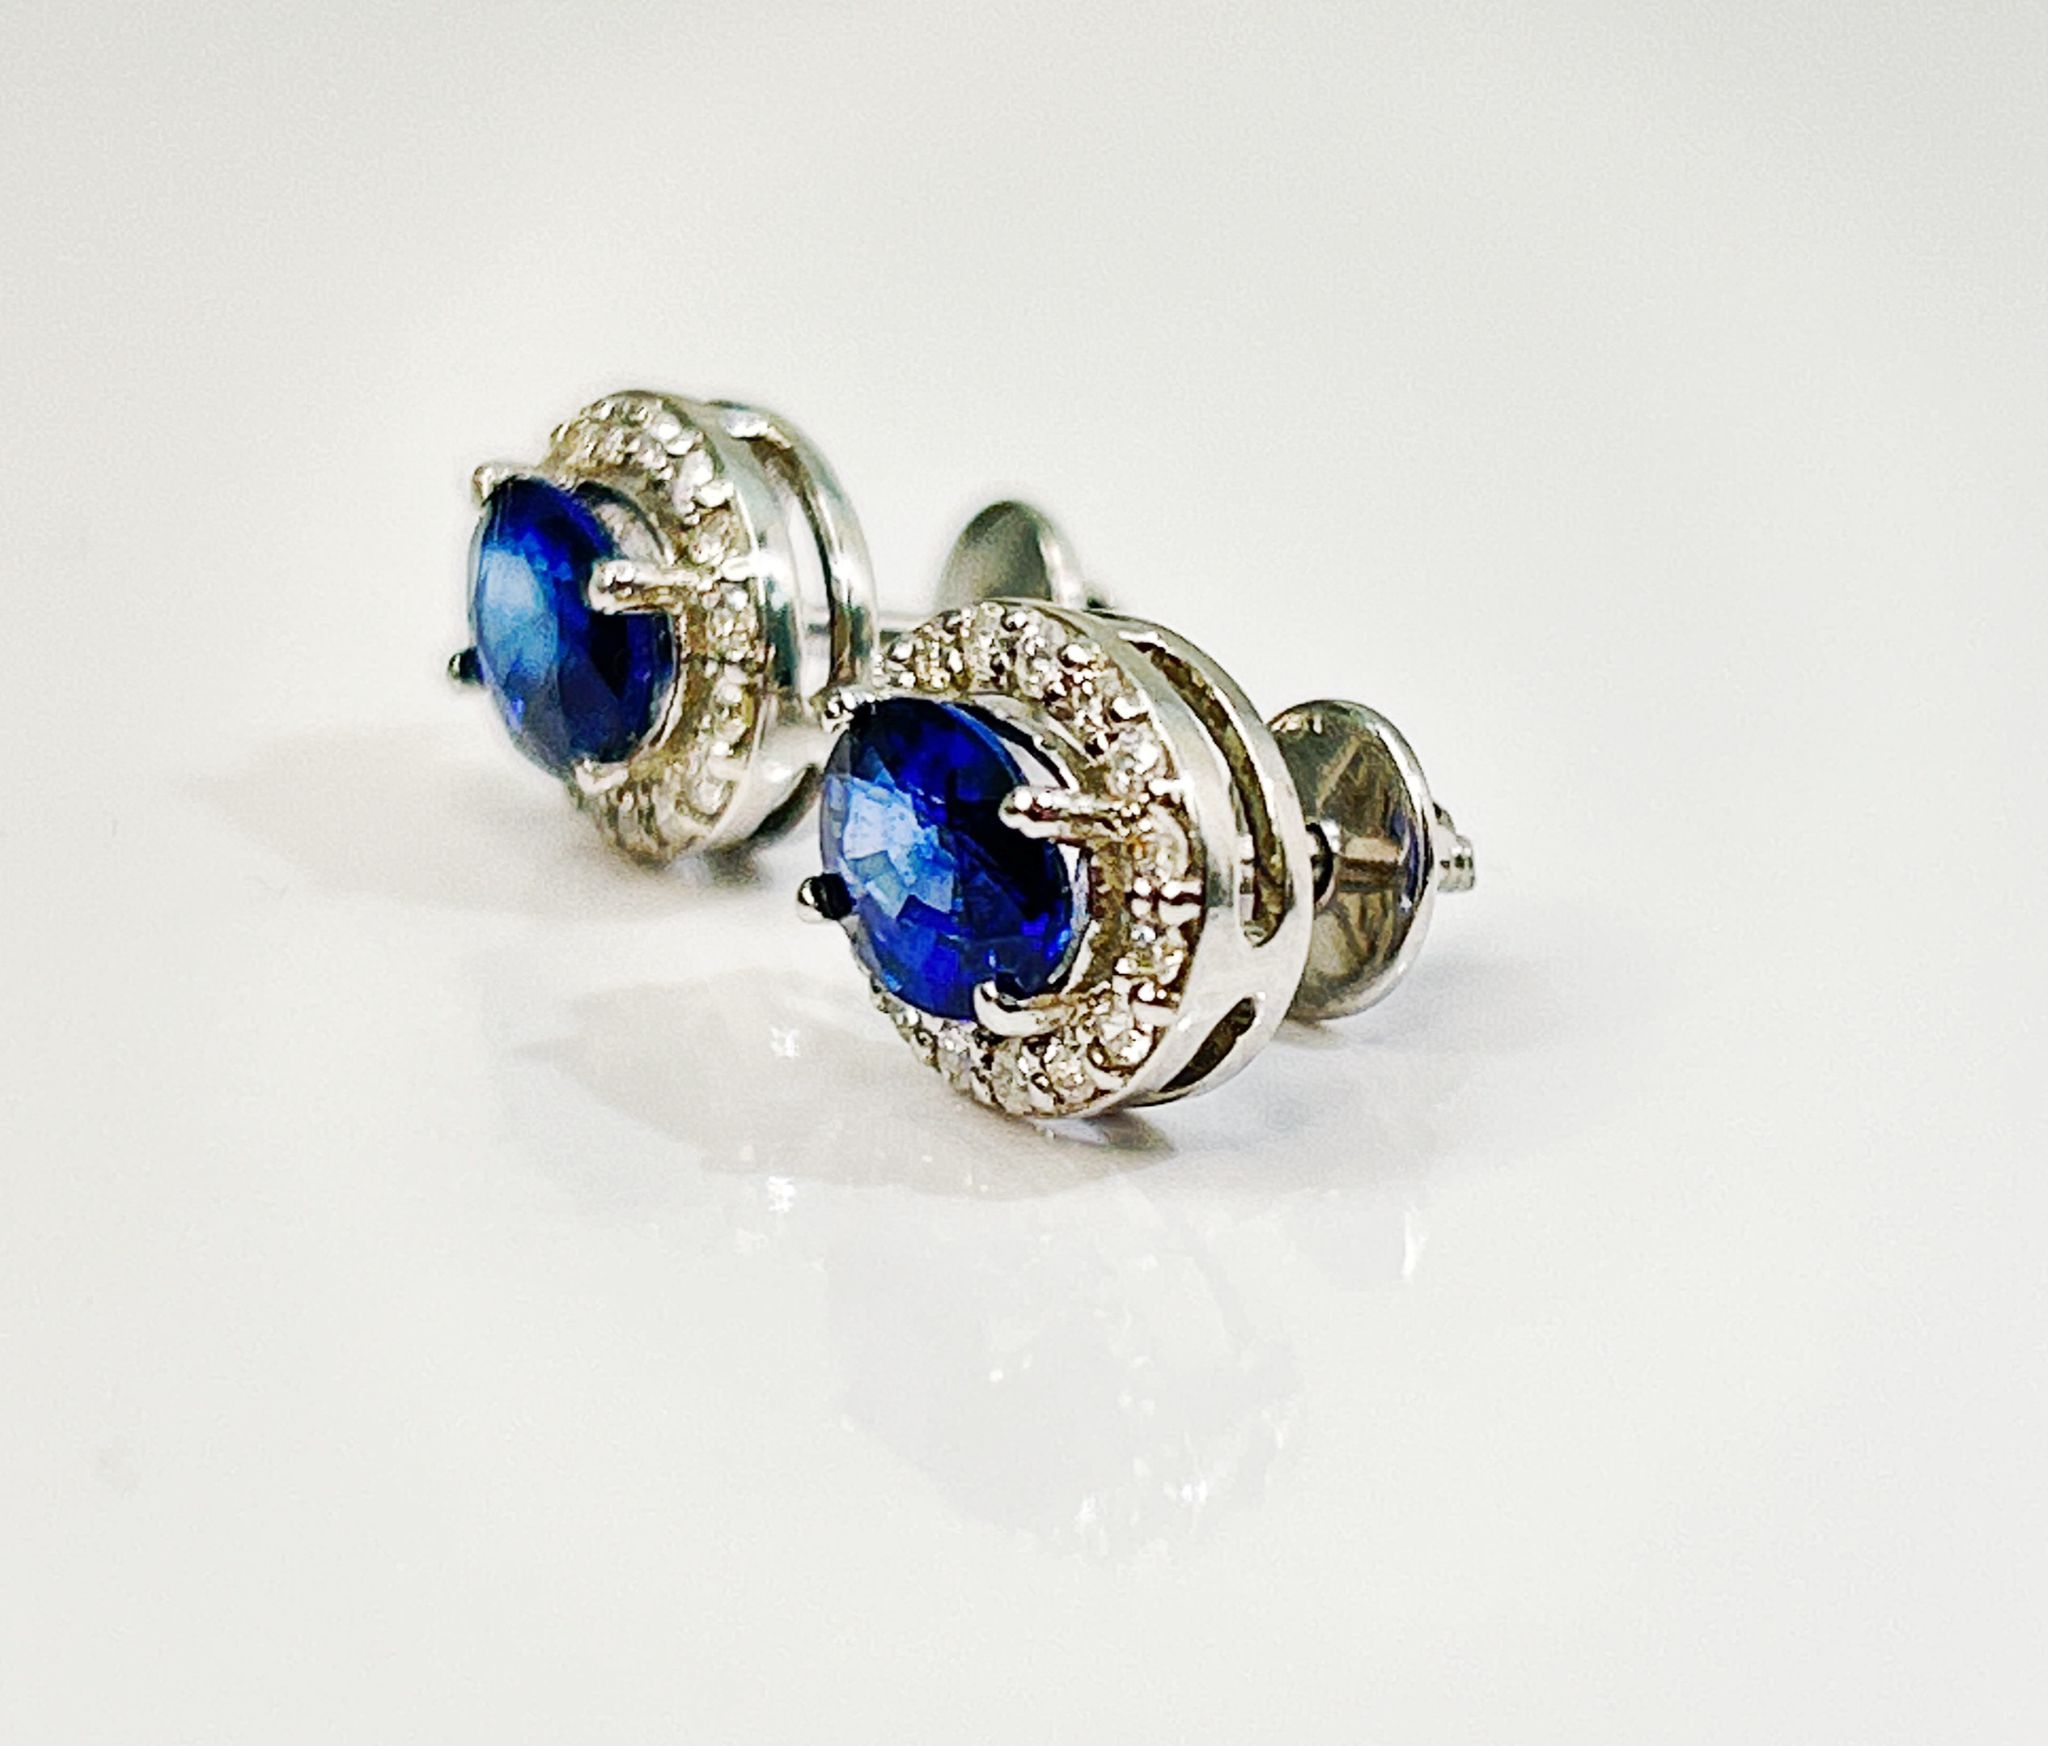 Beautiful Natural Unheated Blue Sapphire earrings with diamonds & Platinum - Image 4 of 7